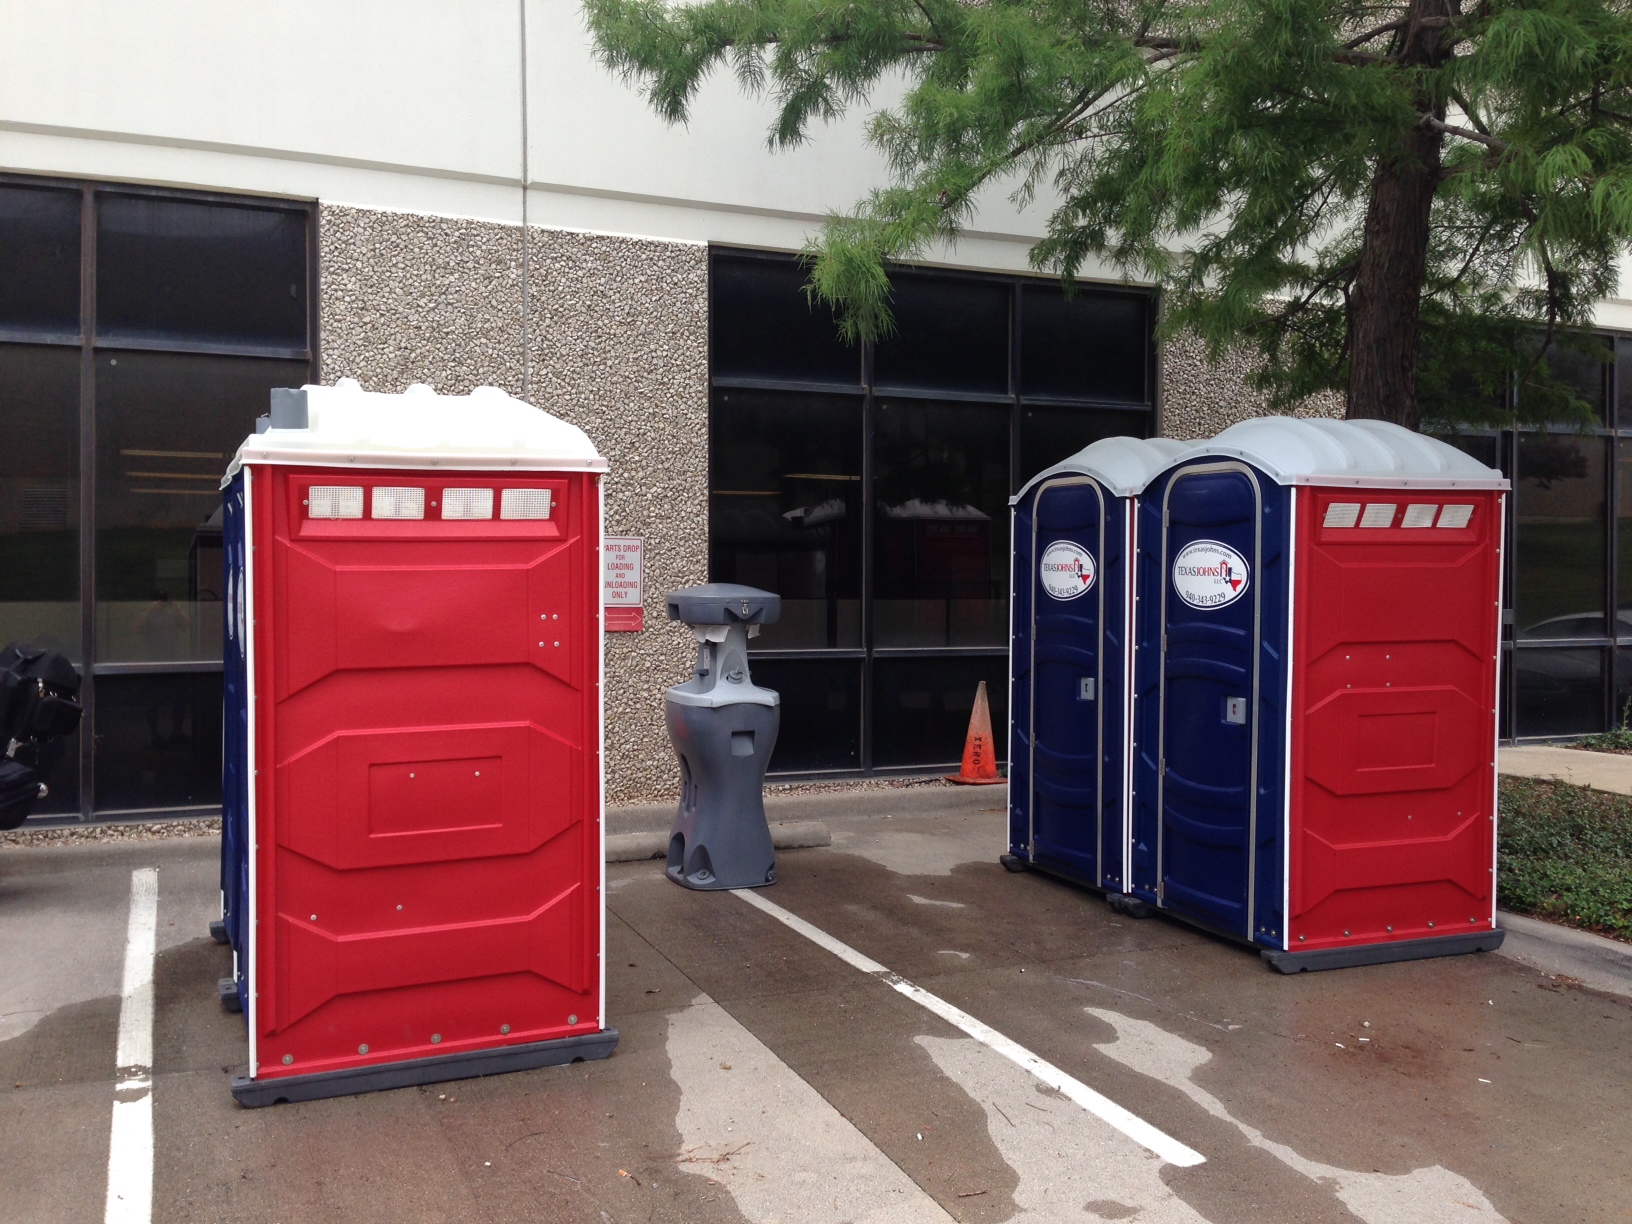 Toilet Trailer Rental Services: Porta Potty Rental for Commercial Needs in Dallas TX